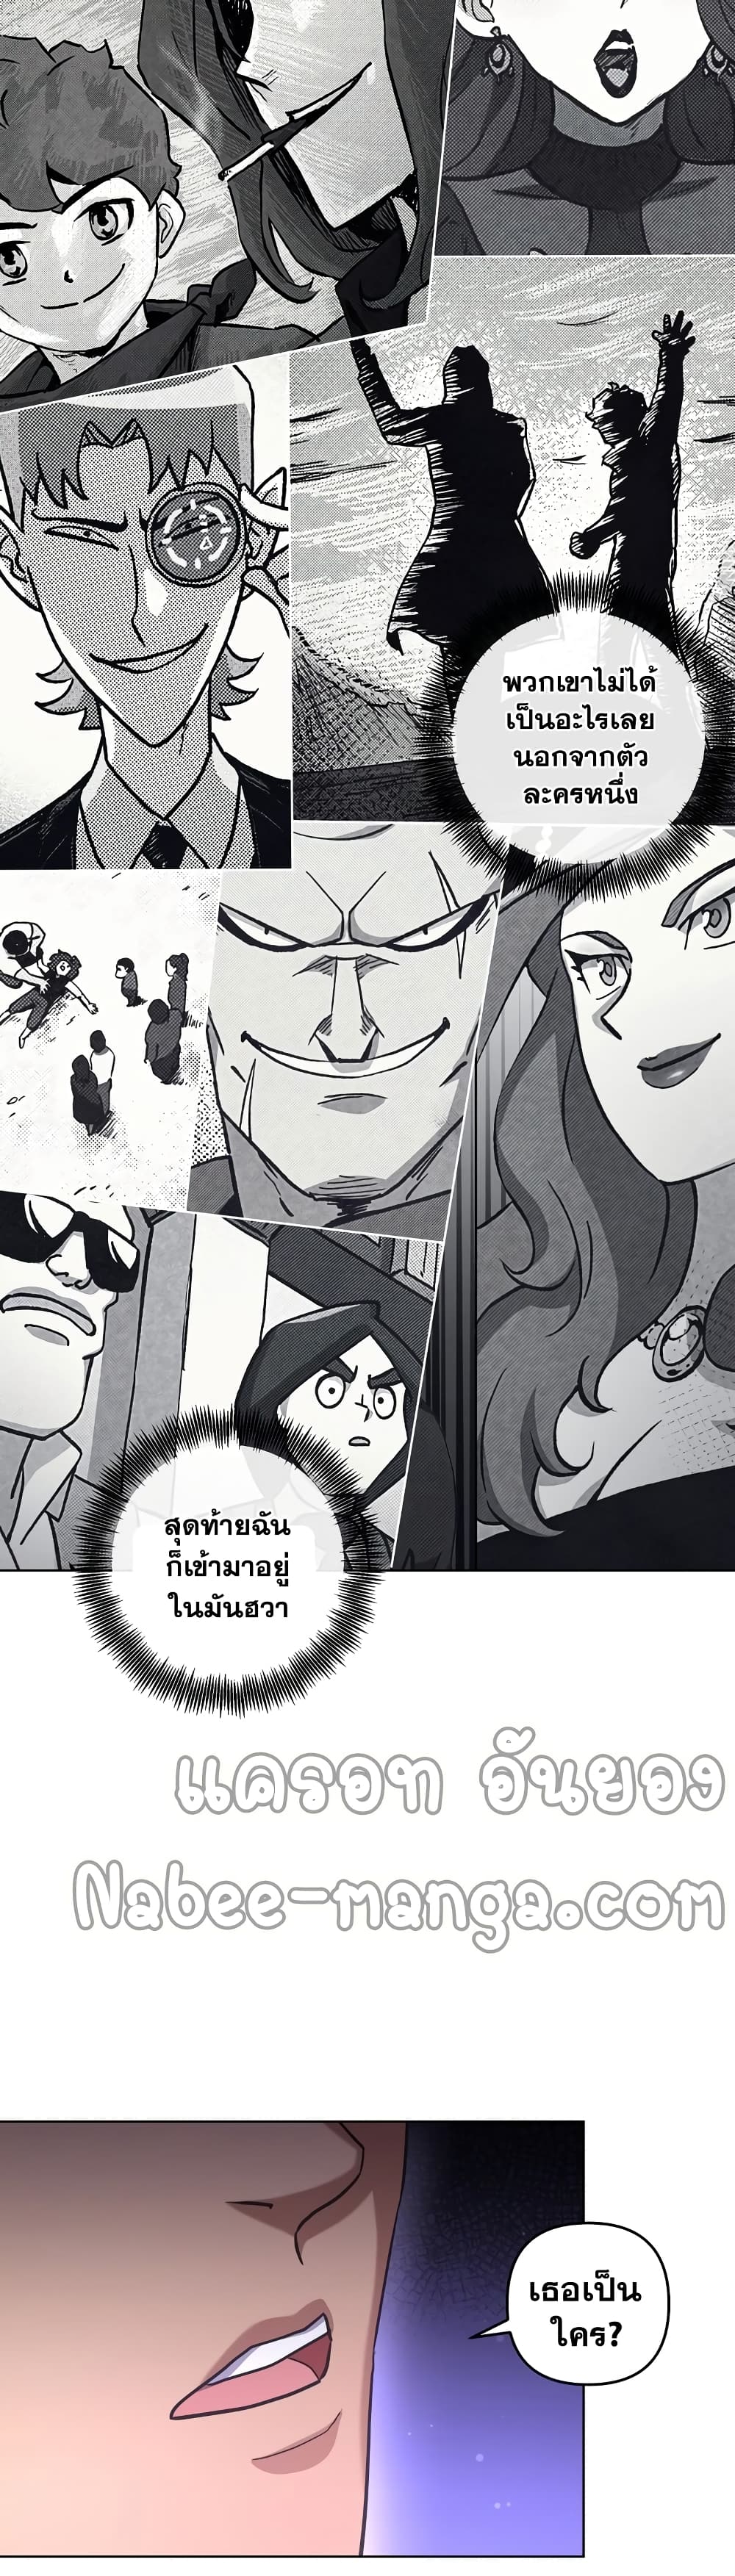 Surviving in an Action Manhwa22 (16)